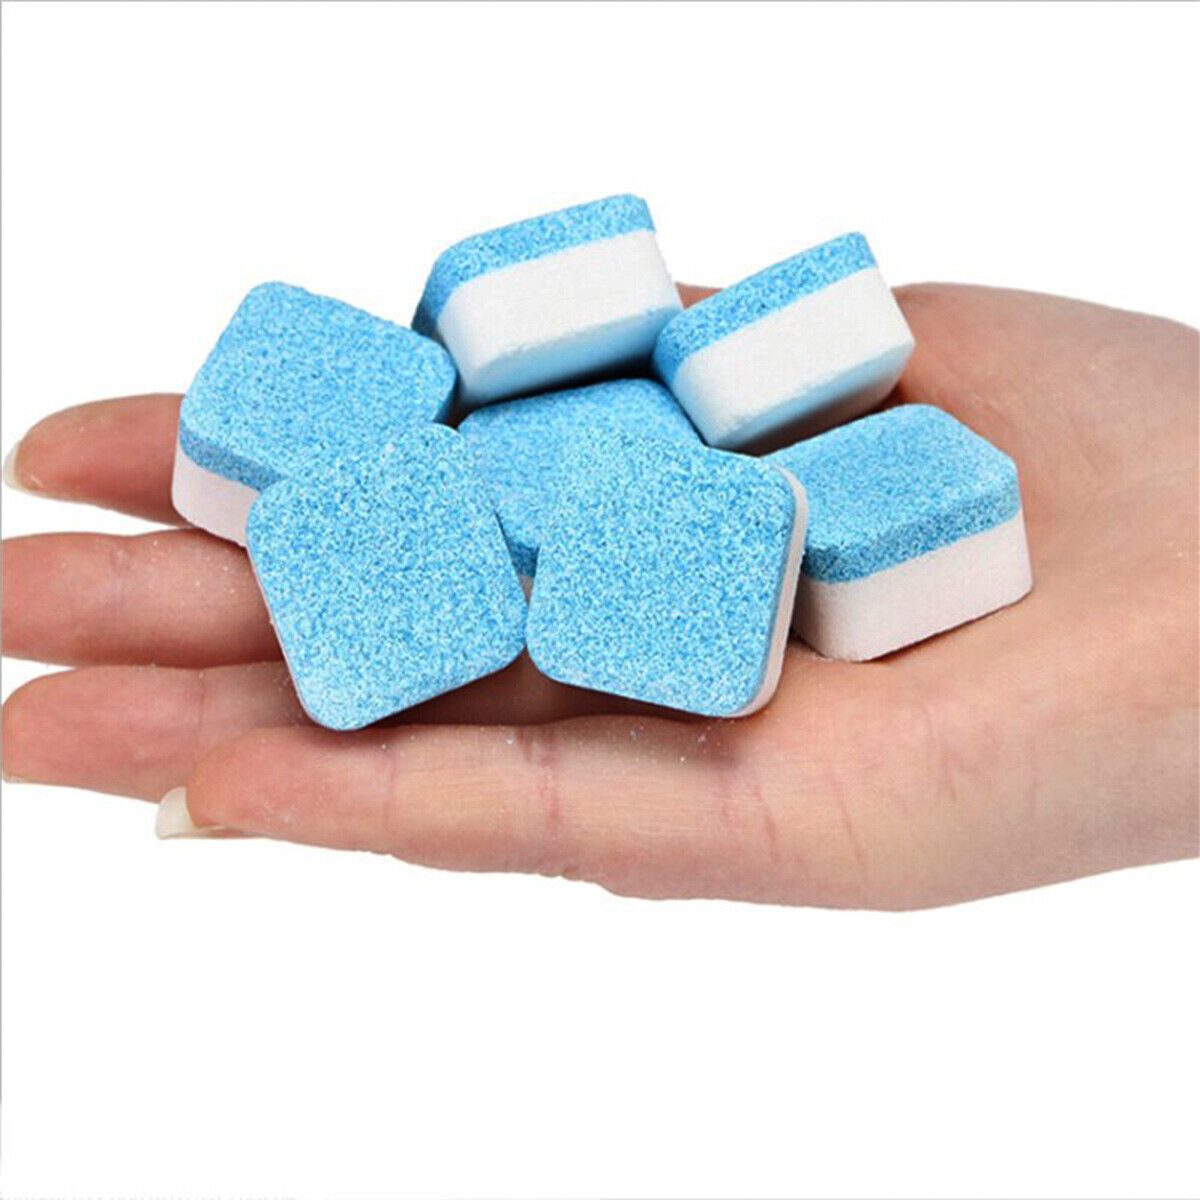 Washing Machine Cleaner 14 Pack- Deep Cleaning Tablets For Front & Top Loader